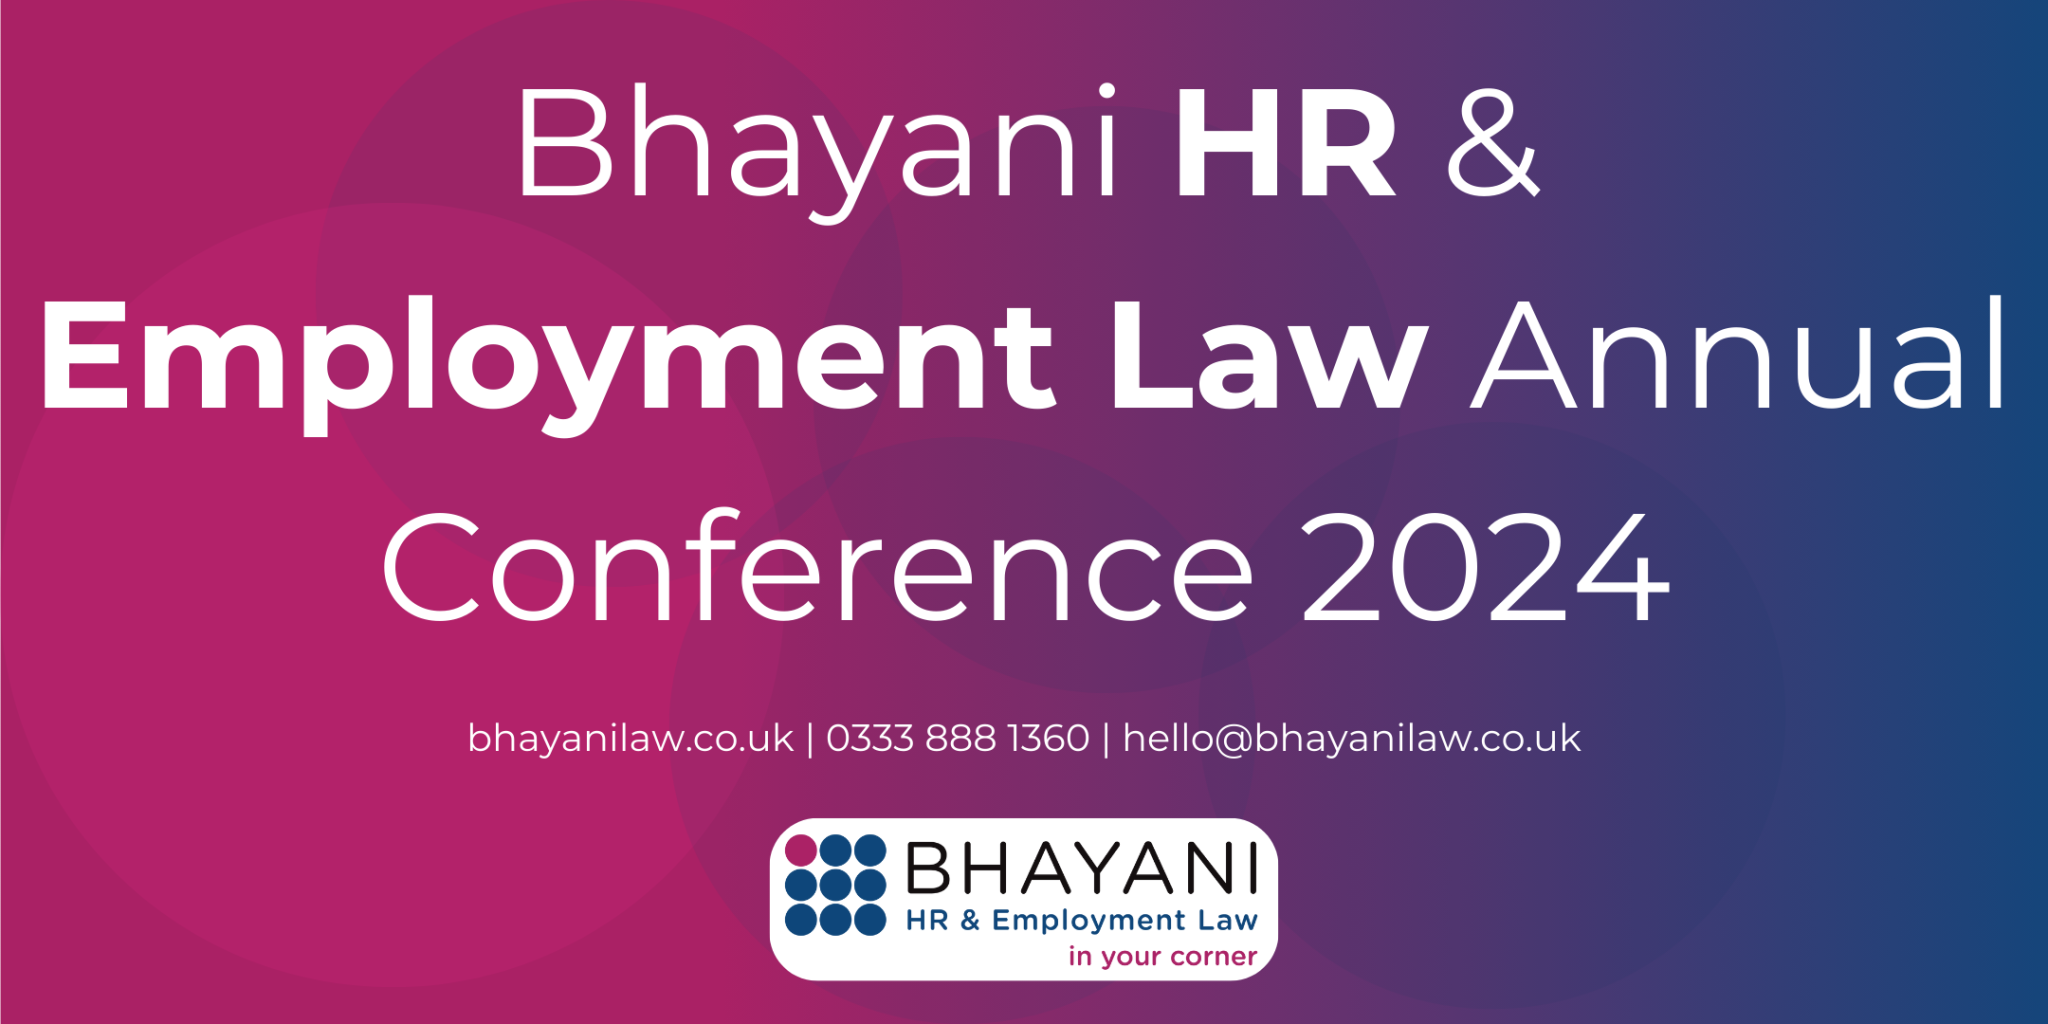 Bhayani HR & Employment Law Annual Conference 2024 Bhayani Law